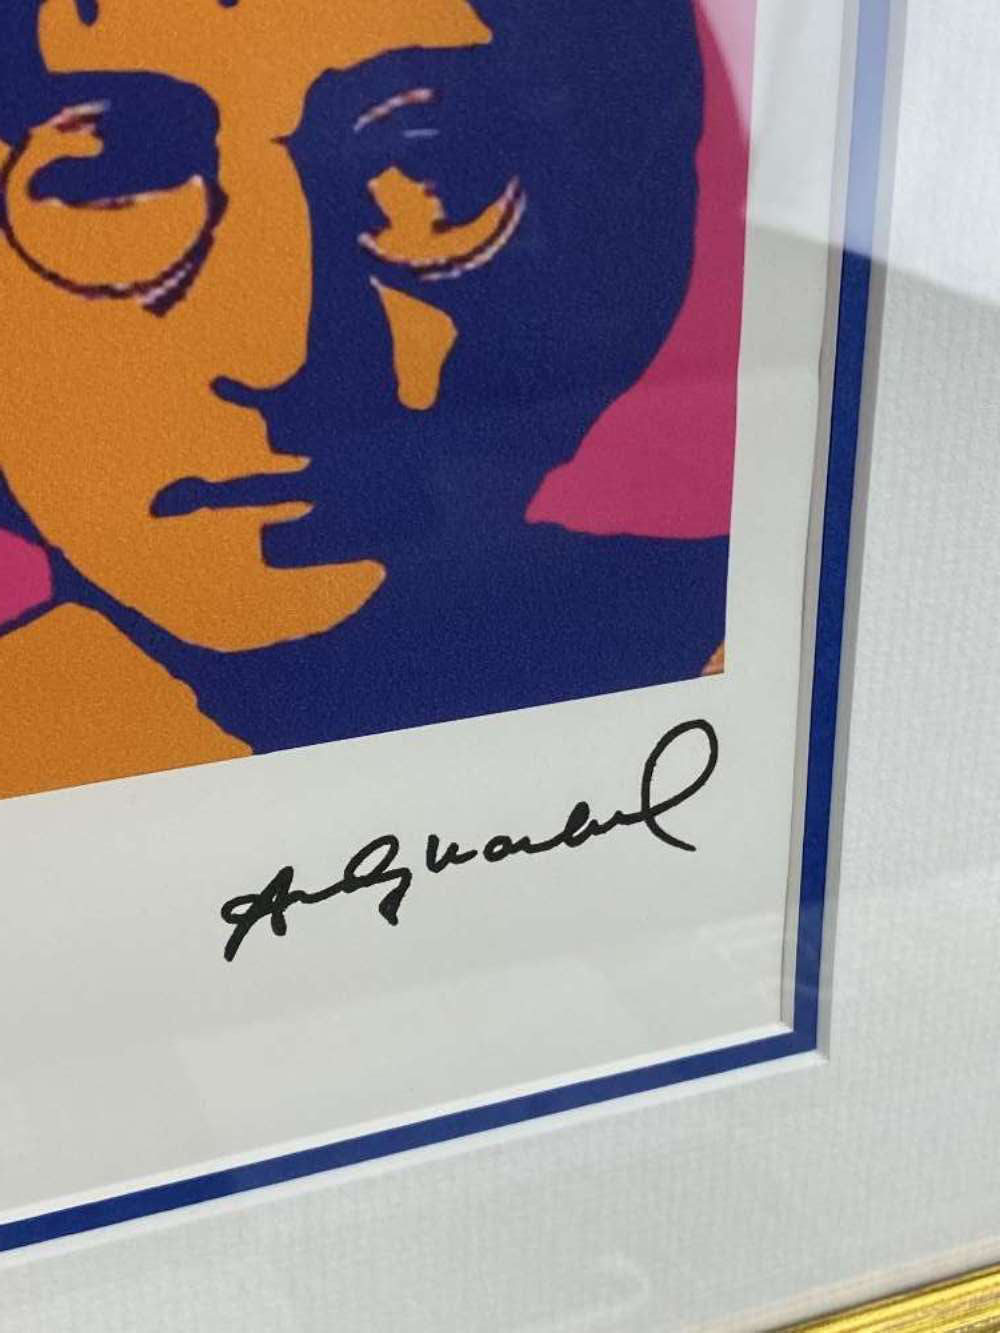 Andy Warhol-(1928-1987) "Lennon" Numbered Lithograph - Image 2 of 5